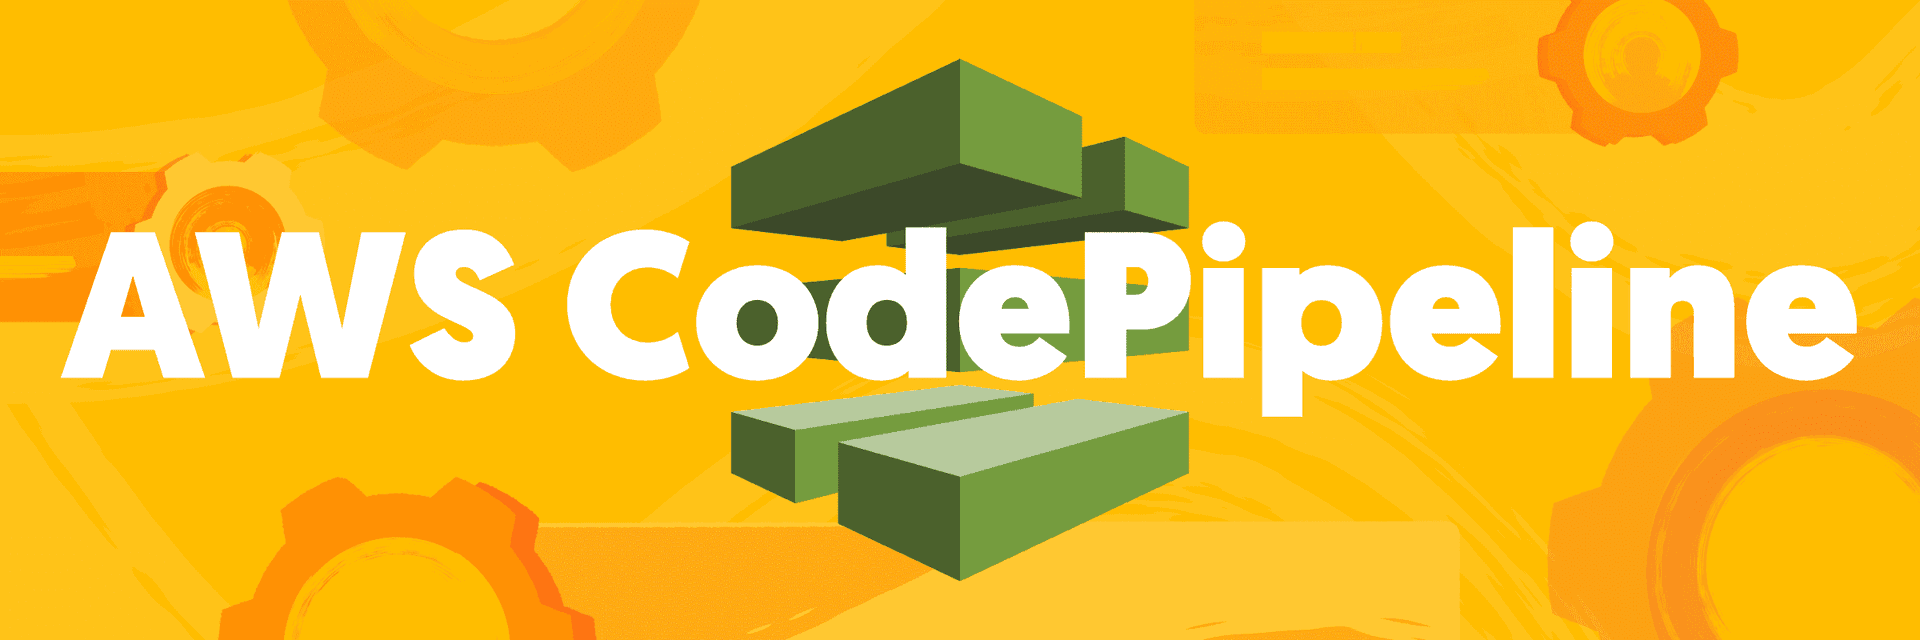 New action: AWS CodePipeline